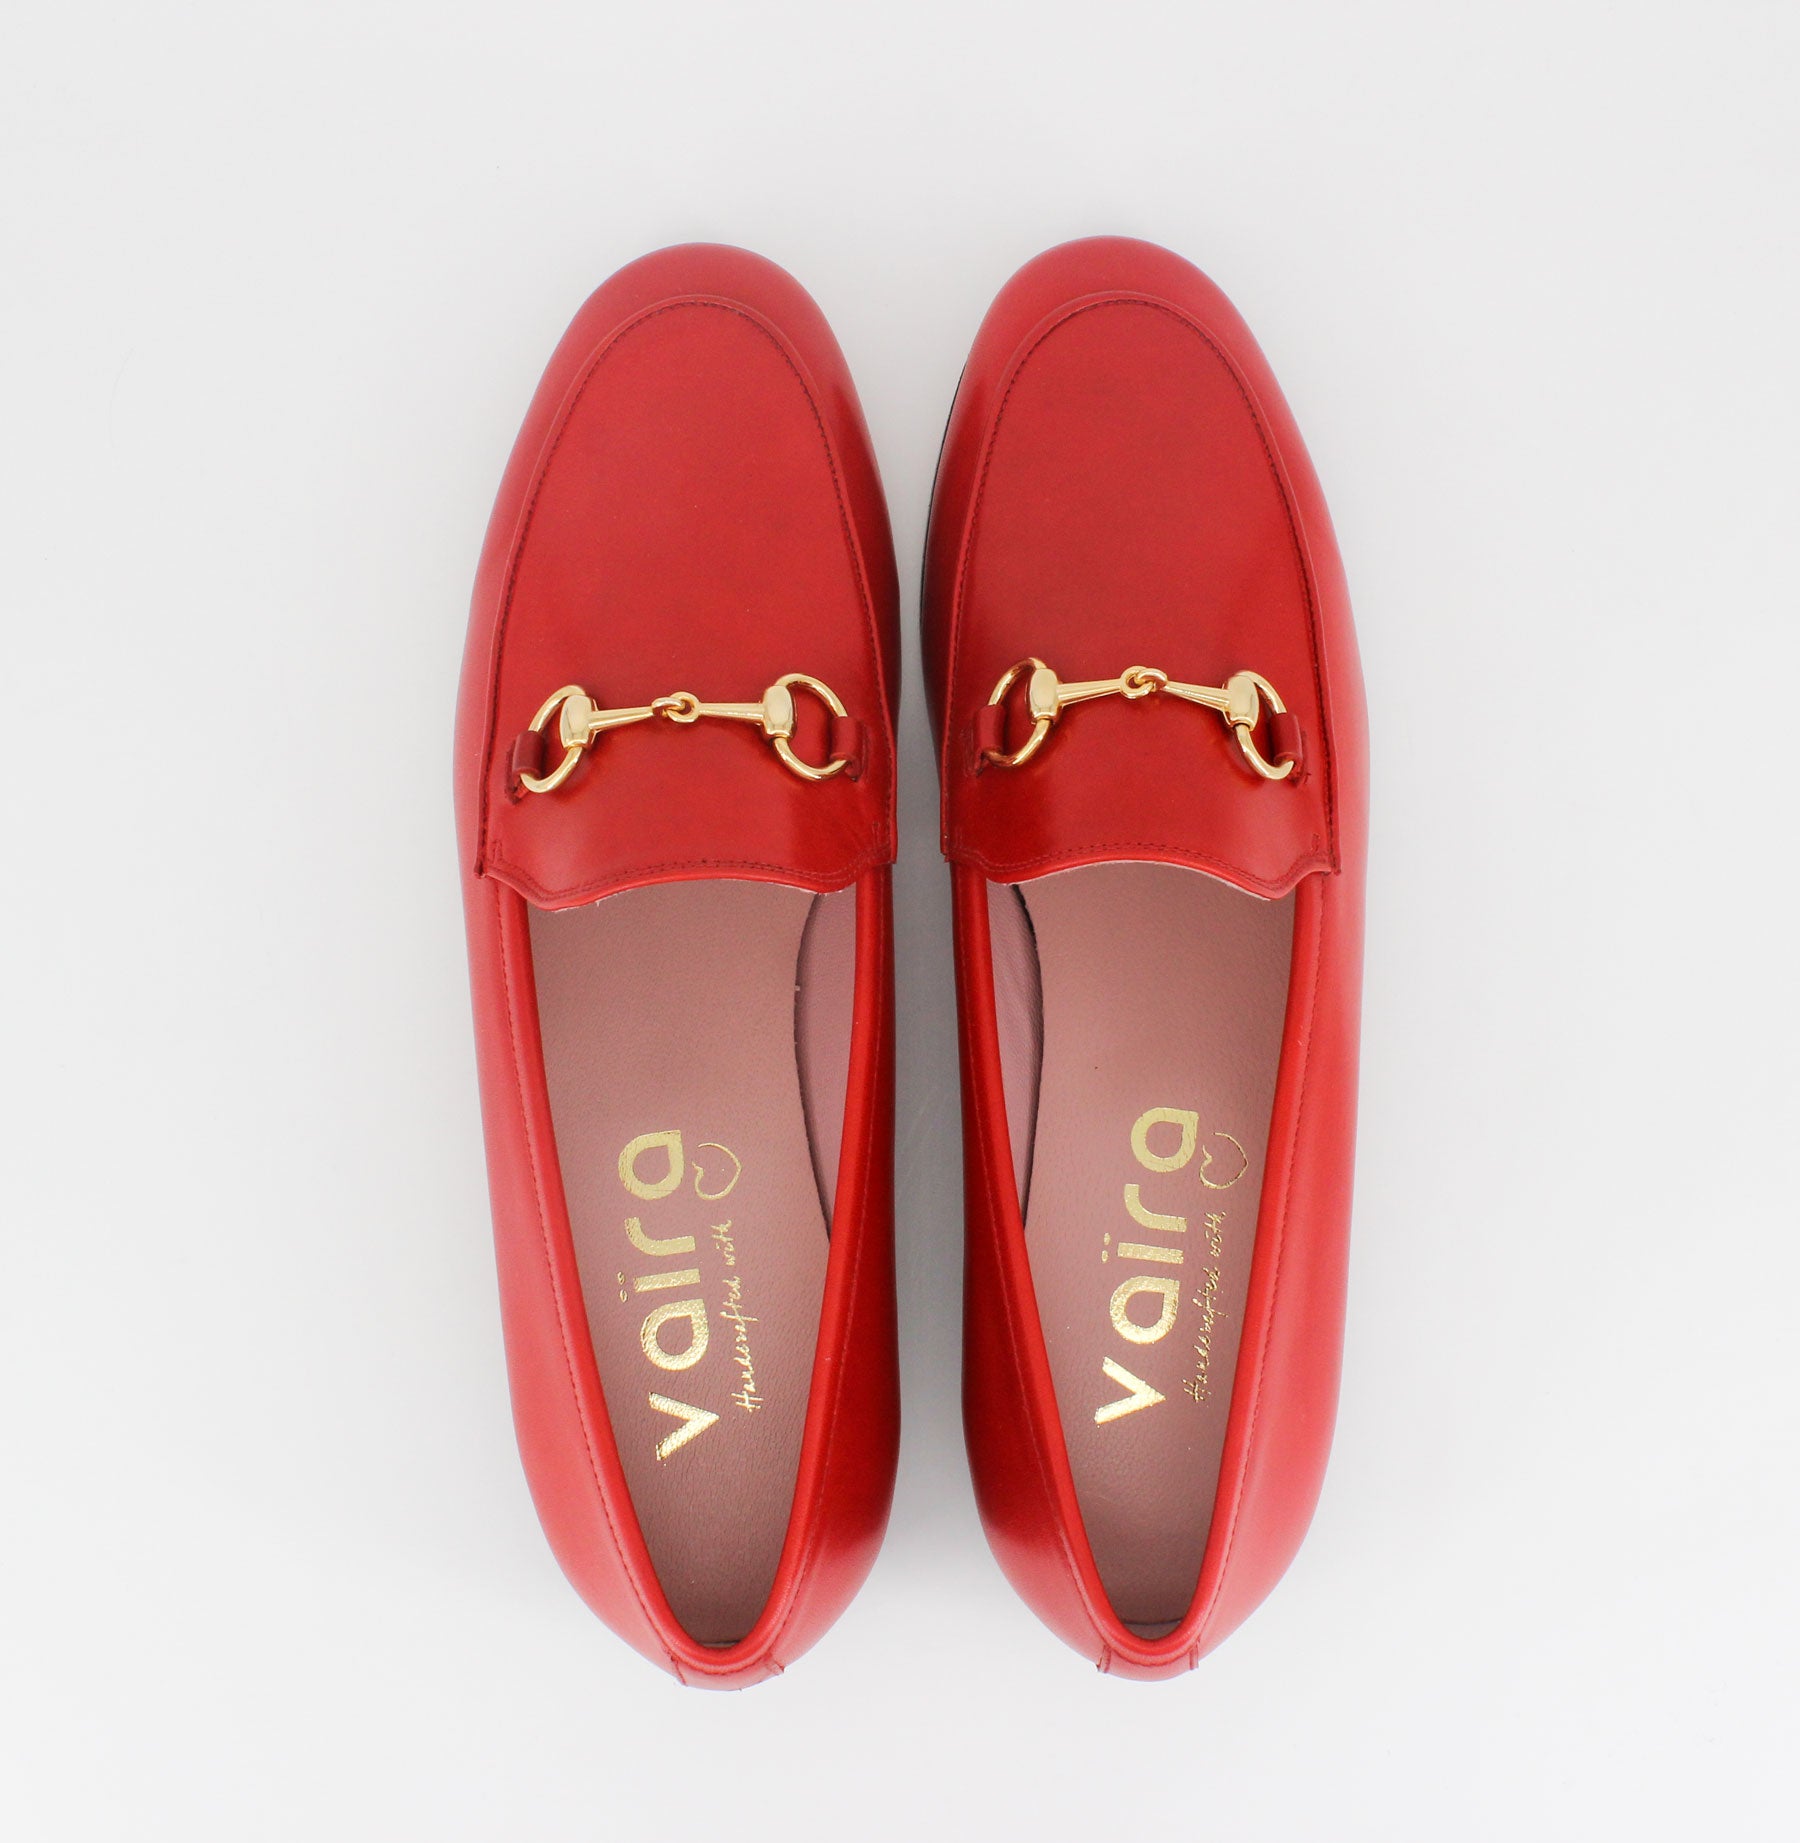 MILAN RED / LEATHER SOLE